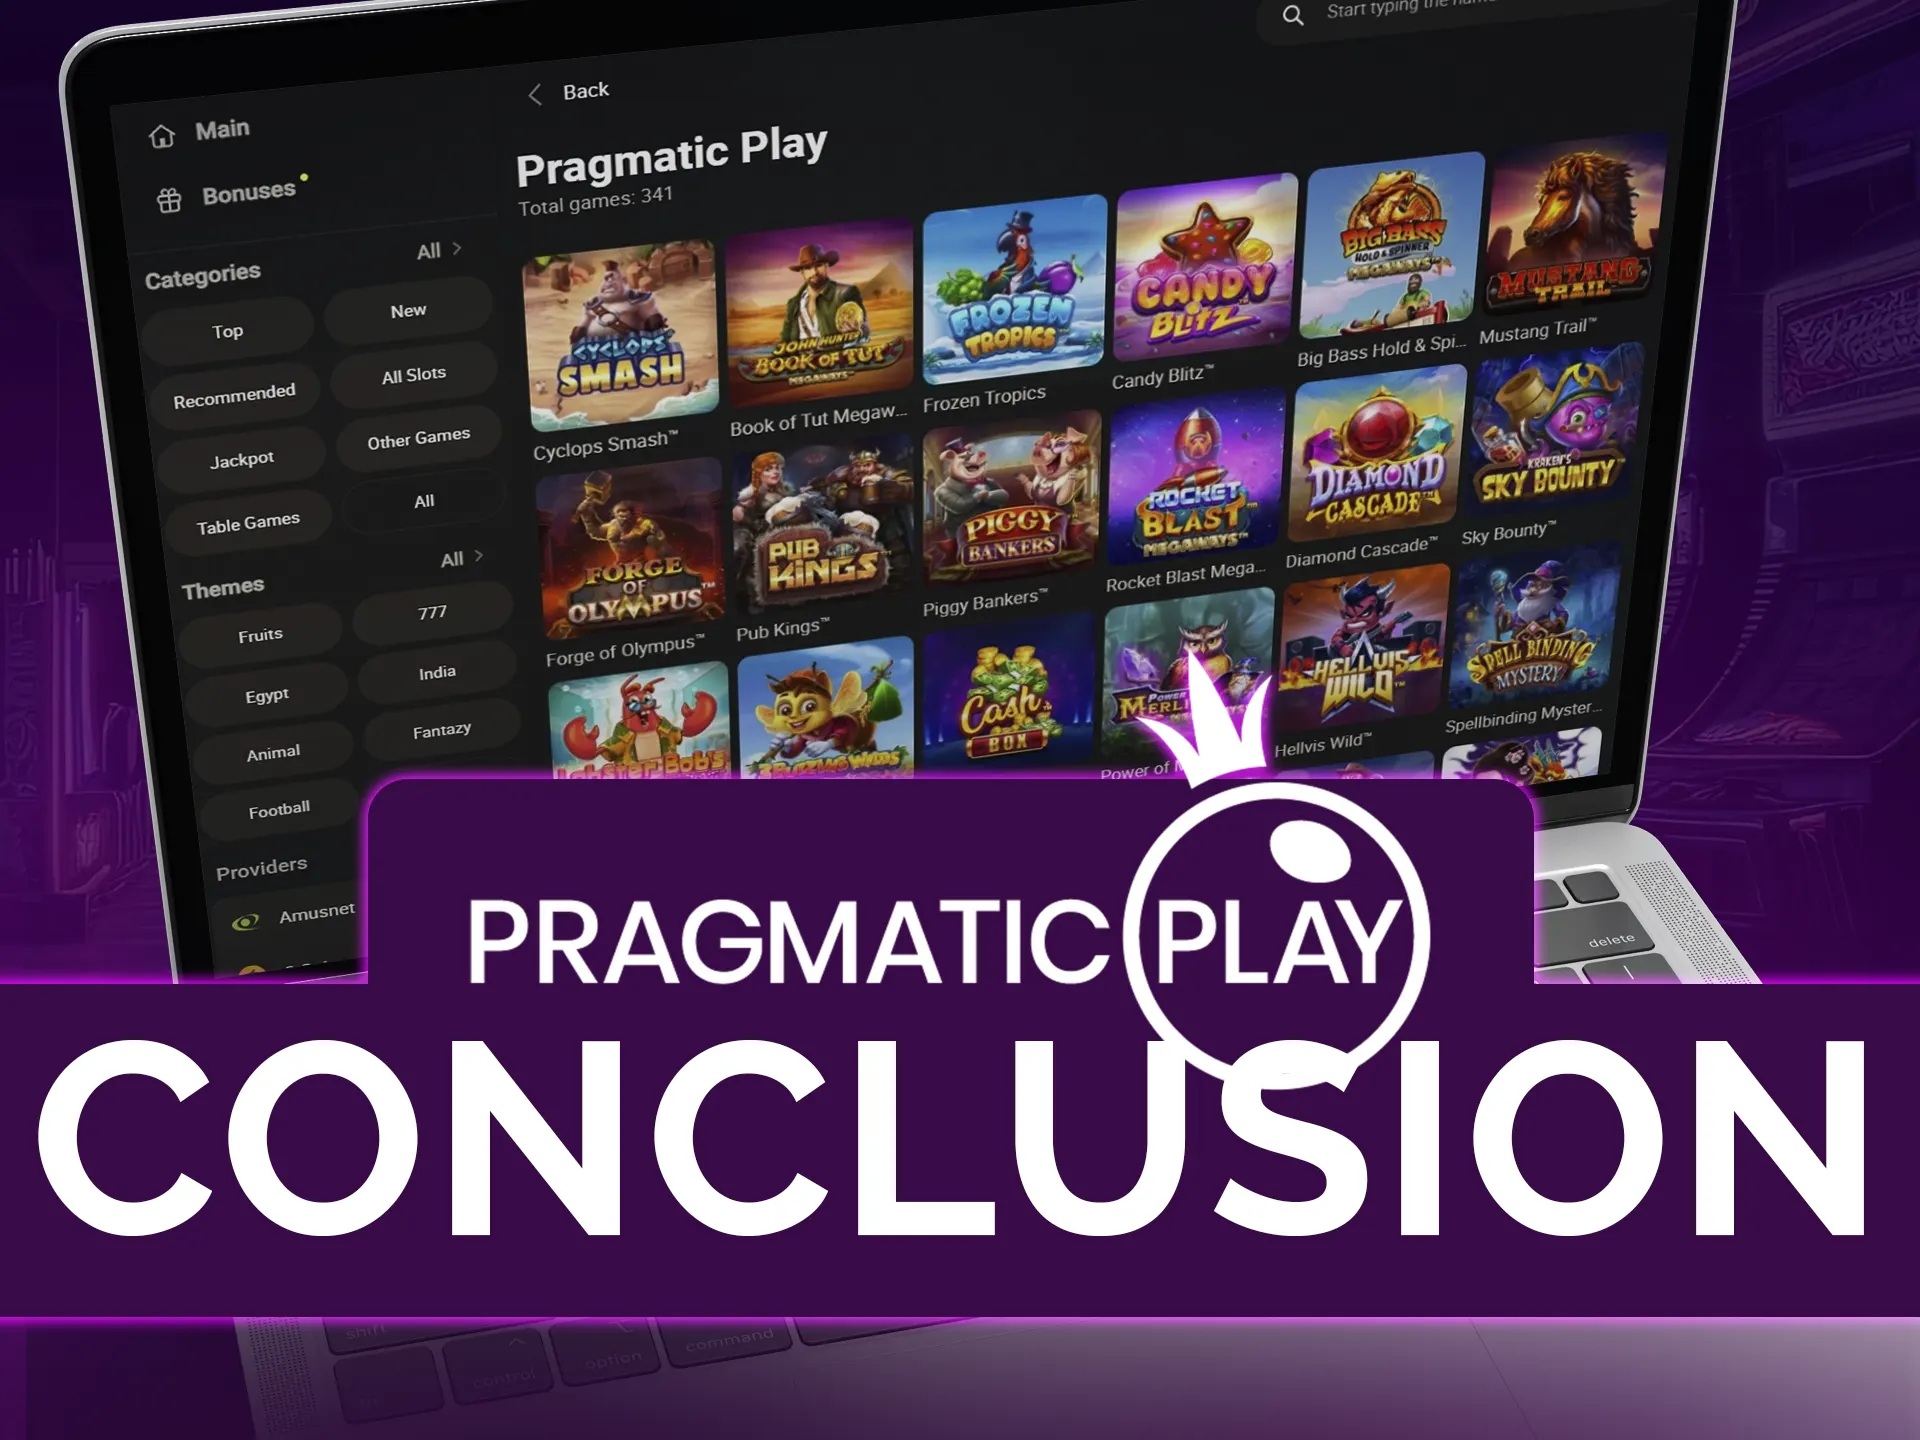 Pragmatic Play innovates with new game features.